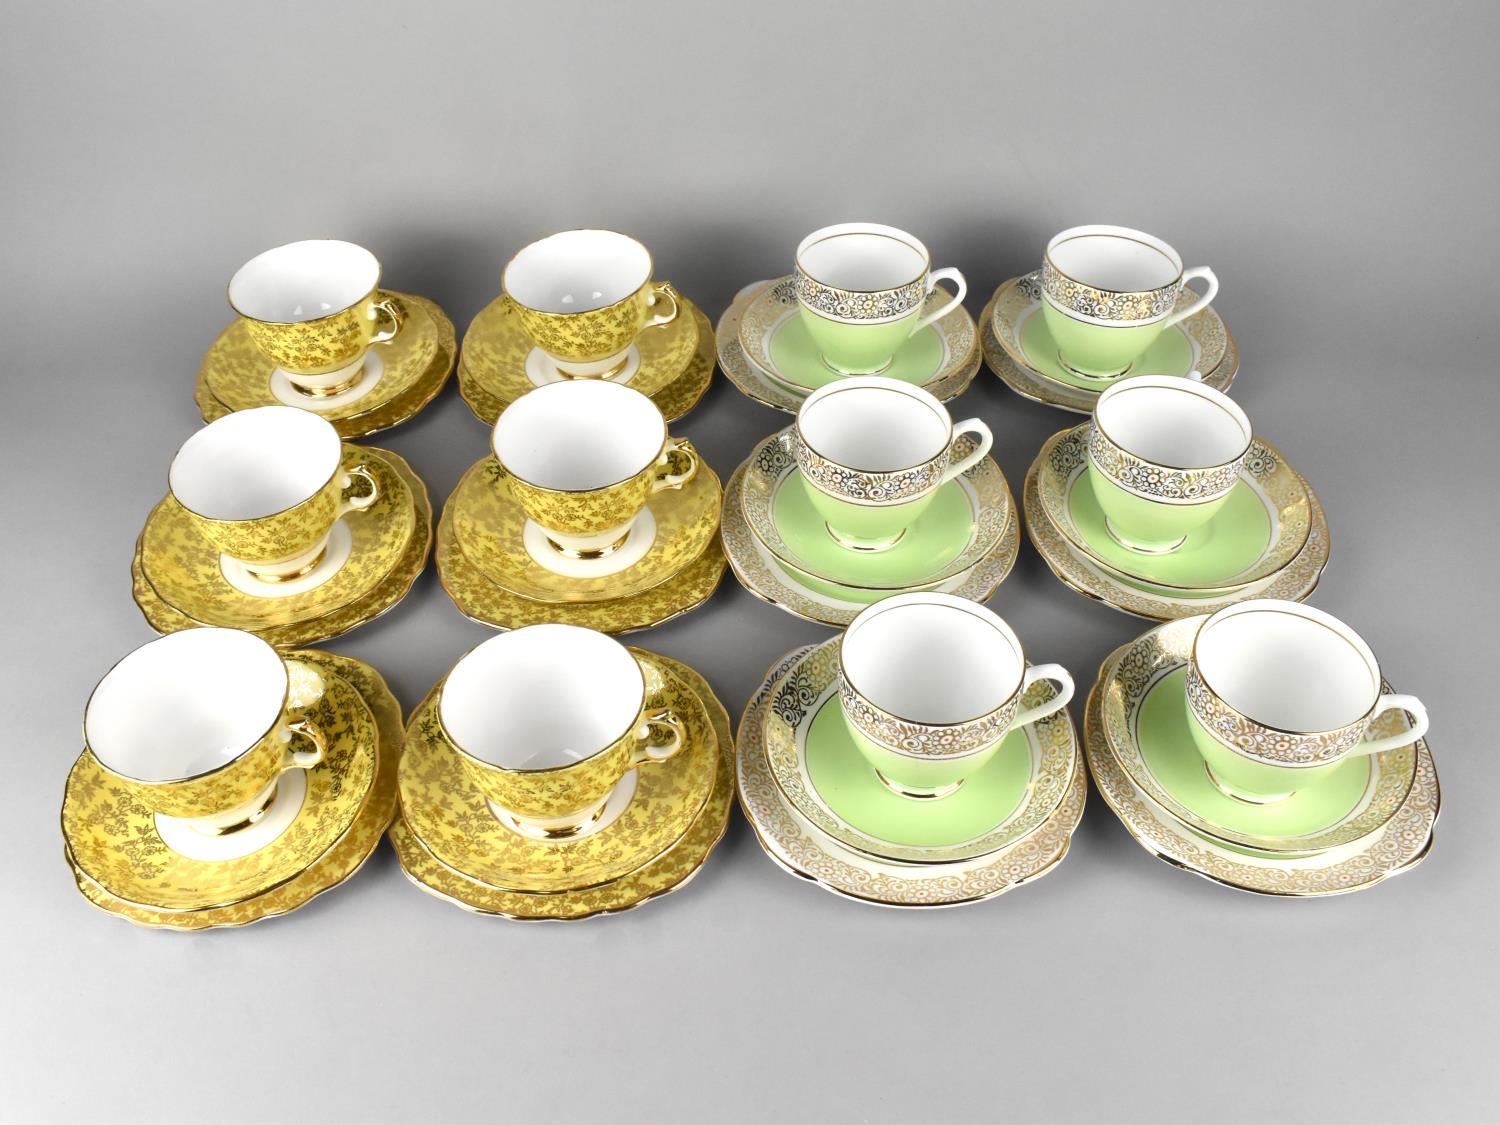 A Regency Yellow and Gilt Decorated Tea Set to Comprise Six Saucers, Six Side Plates and Six Cups